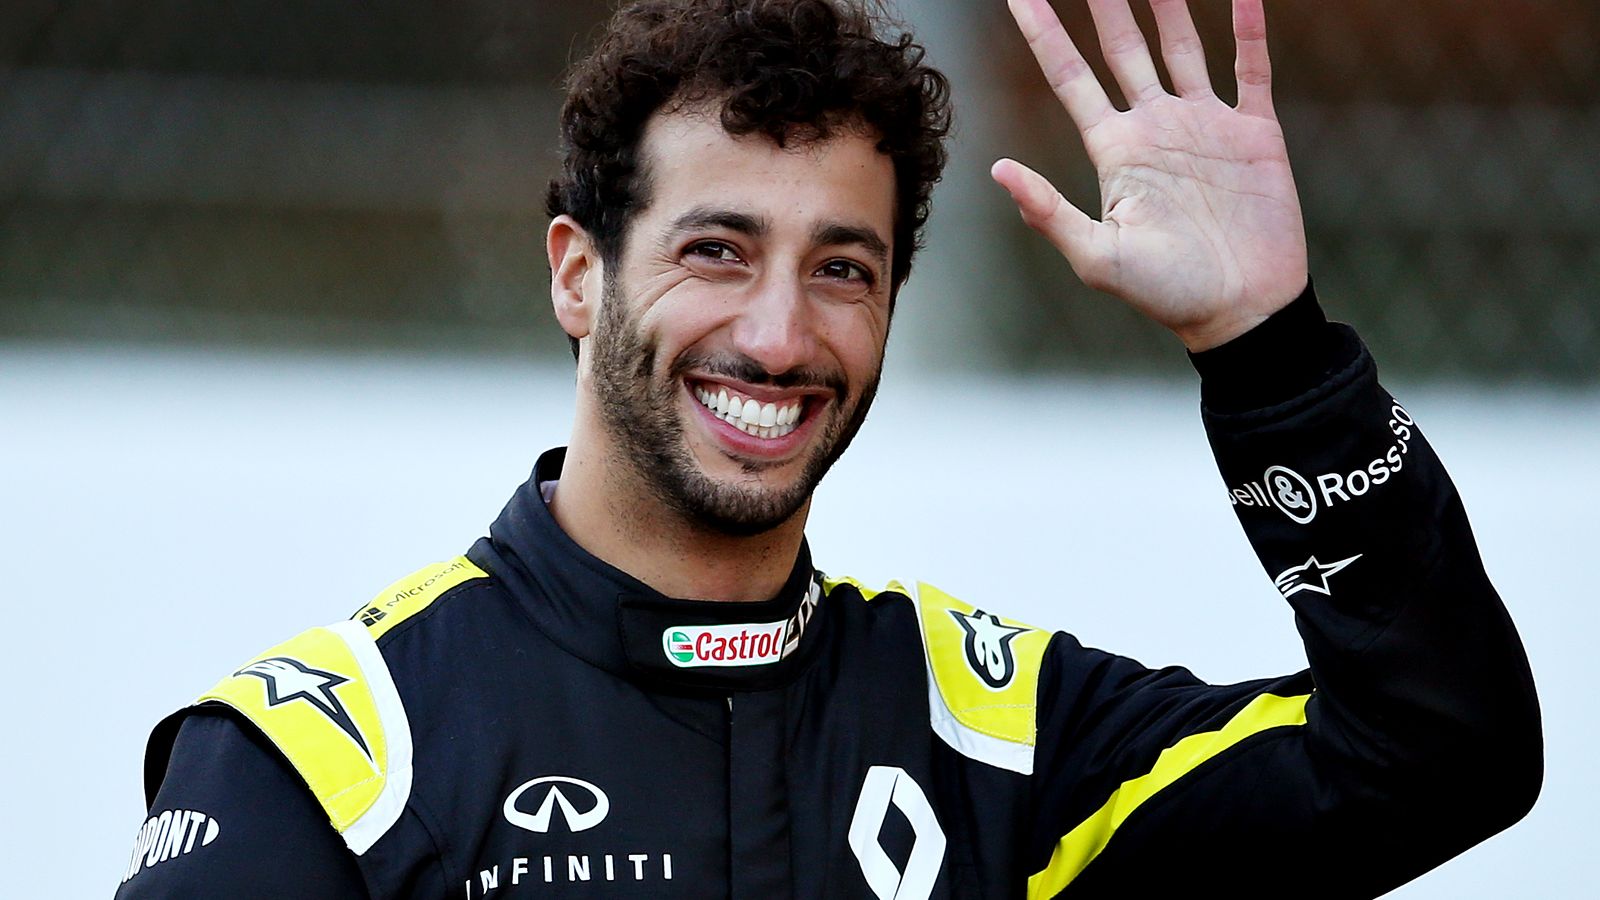 Daniel Ricciardo will 'answer calls' from teams but wants Renault stay ...